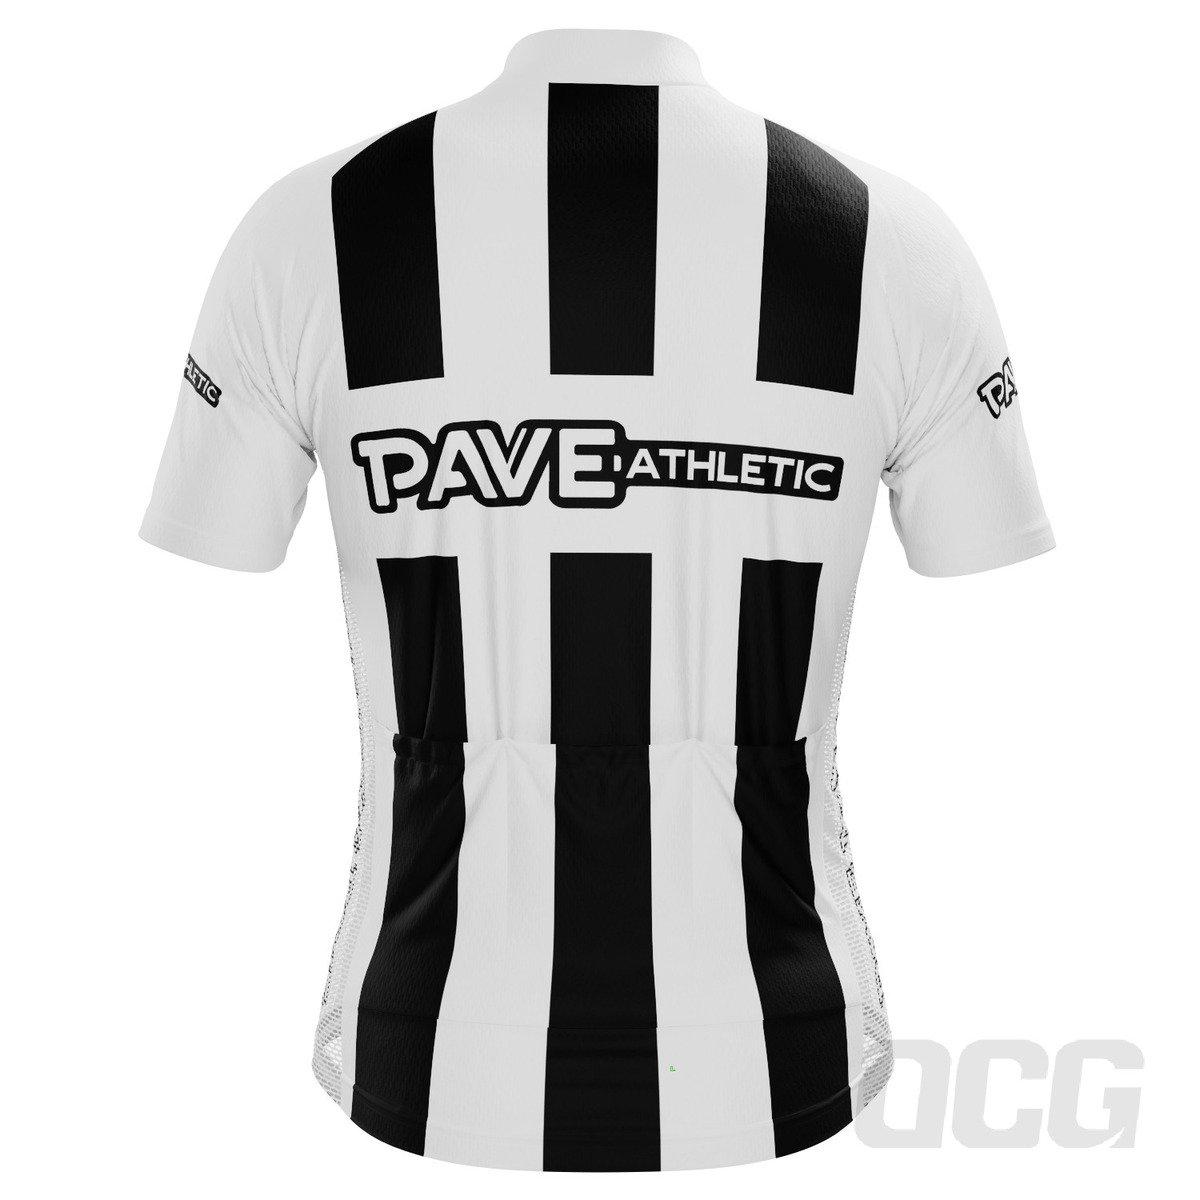 PAVE Athletic Retro Squadra Short Sleeve Cycling Jersey